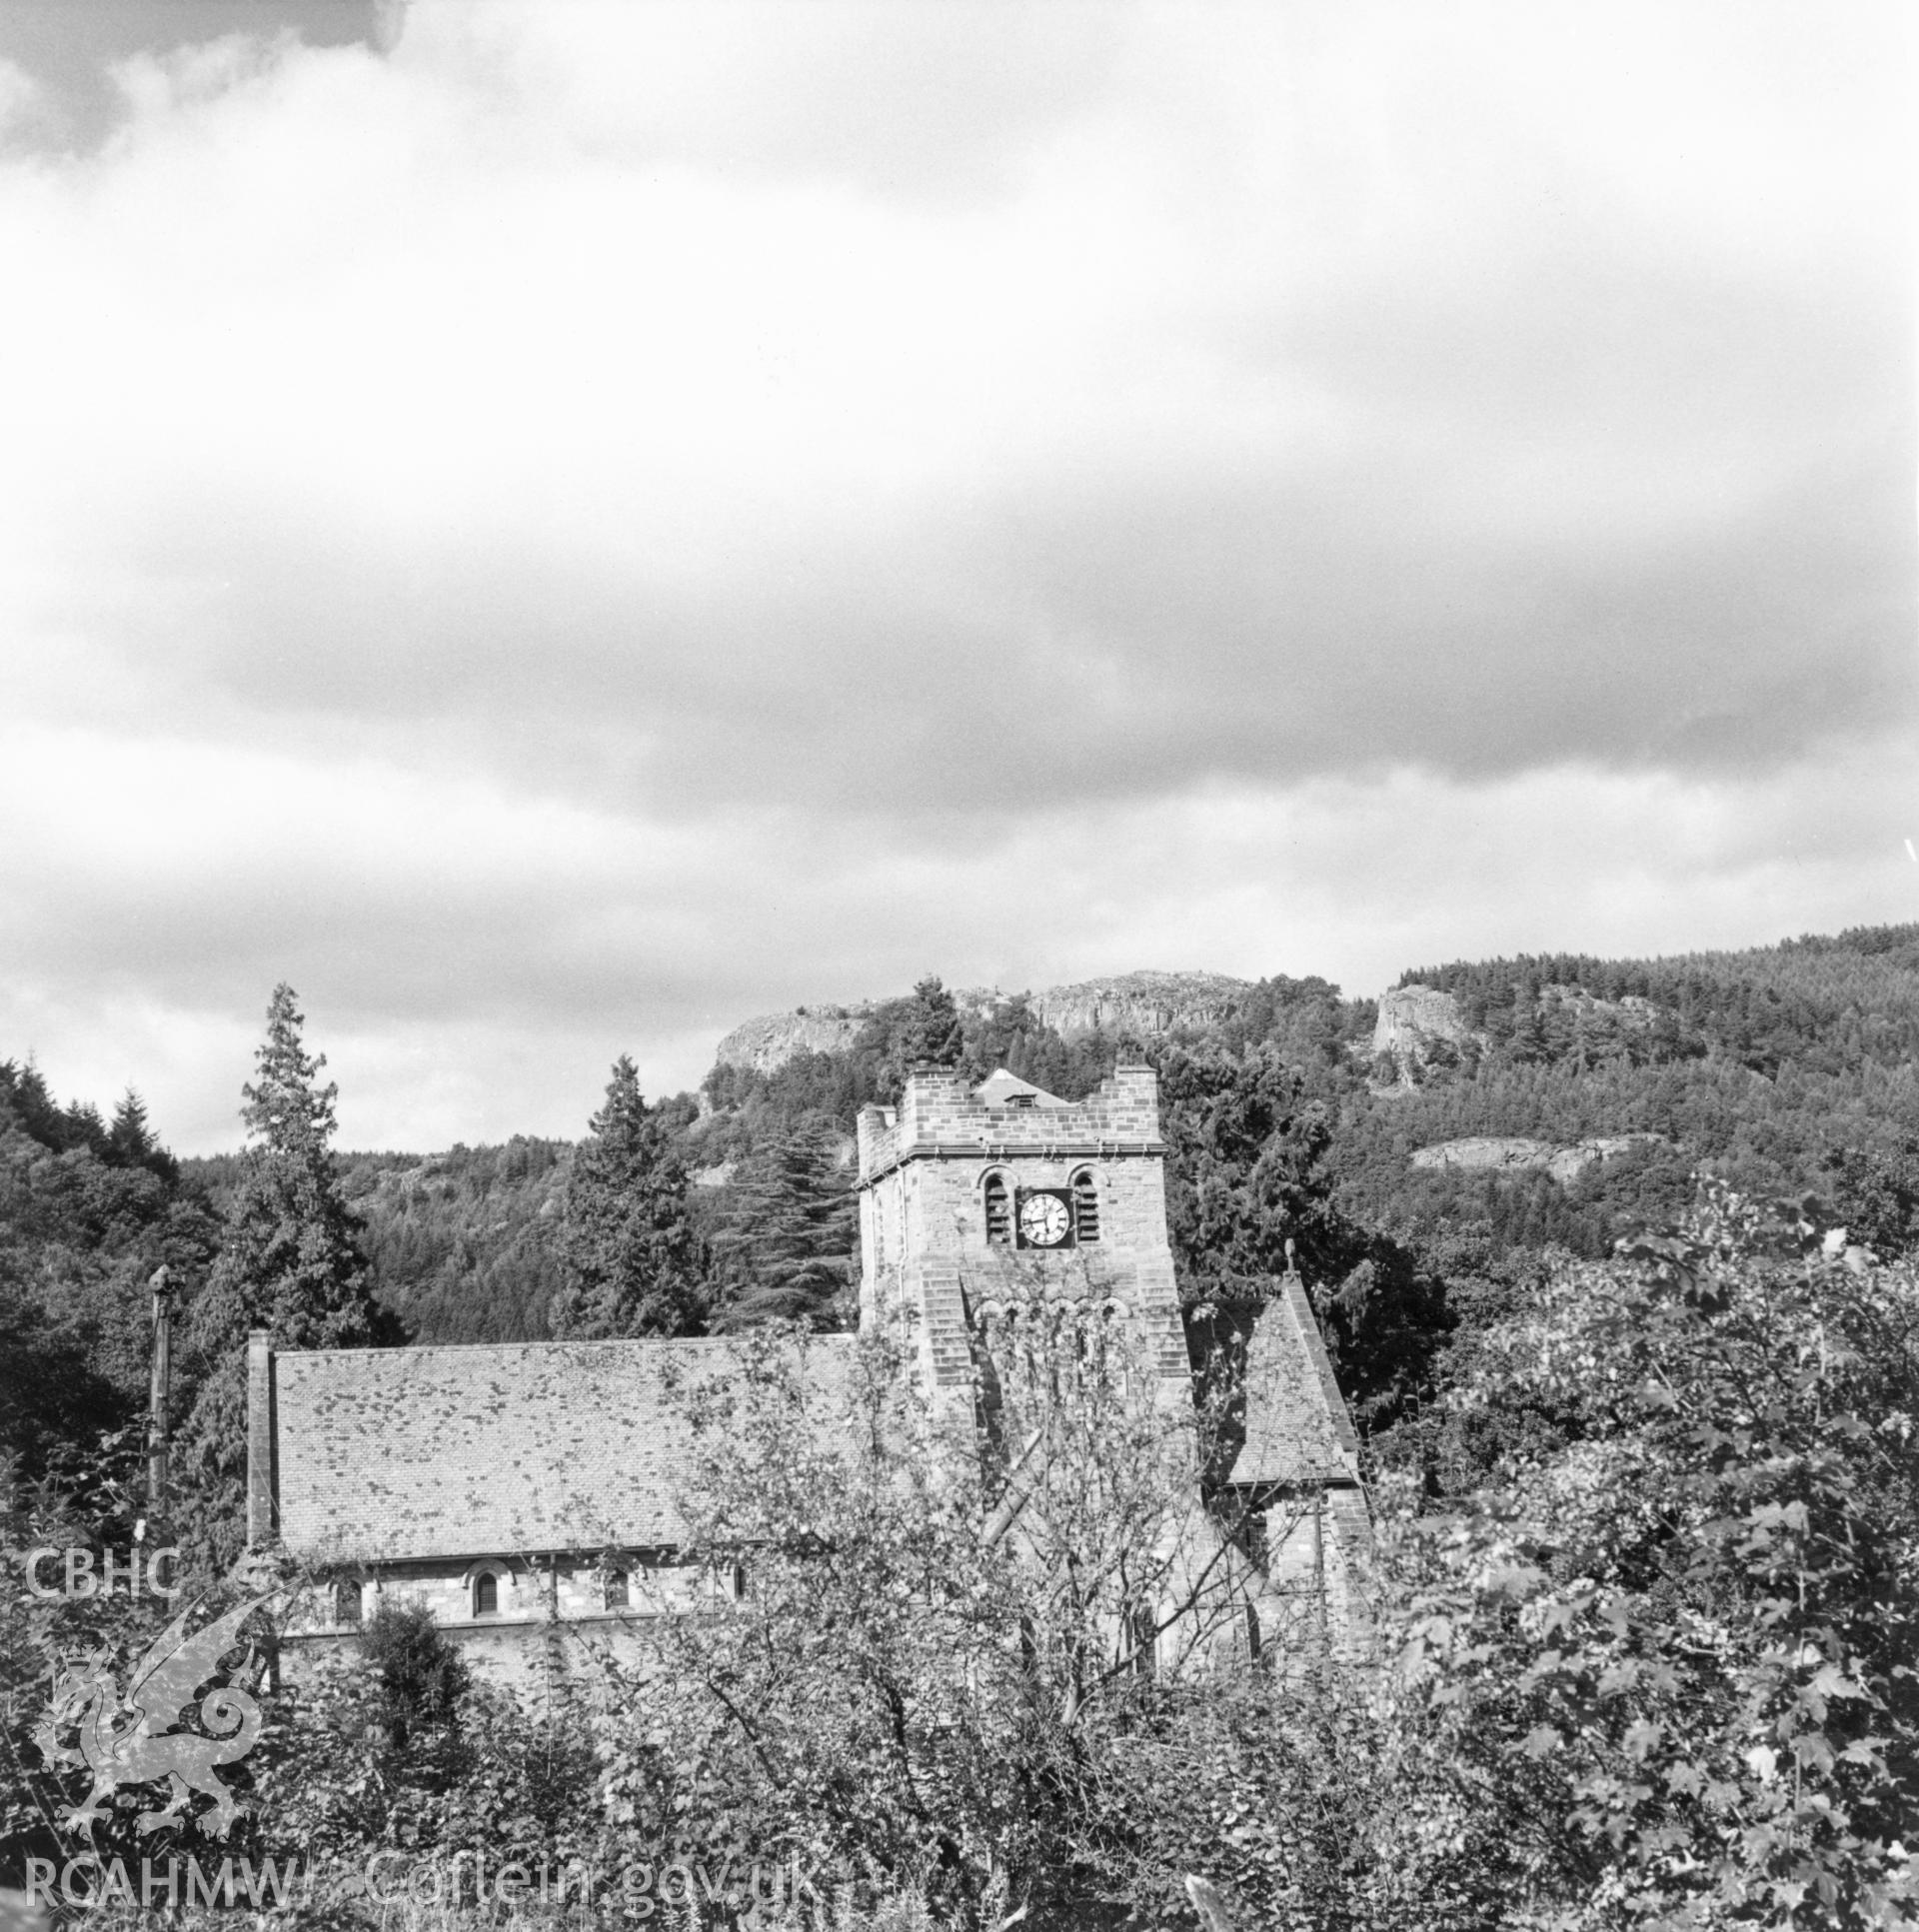 1 b/w print showing view of St Mary's Church, Betws-y-Coed; collated by the former Central Office of Information.